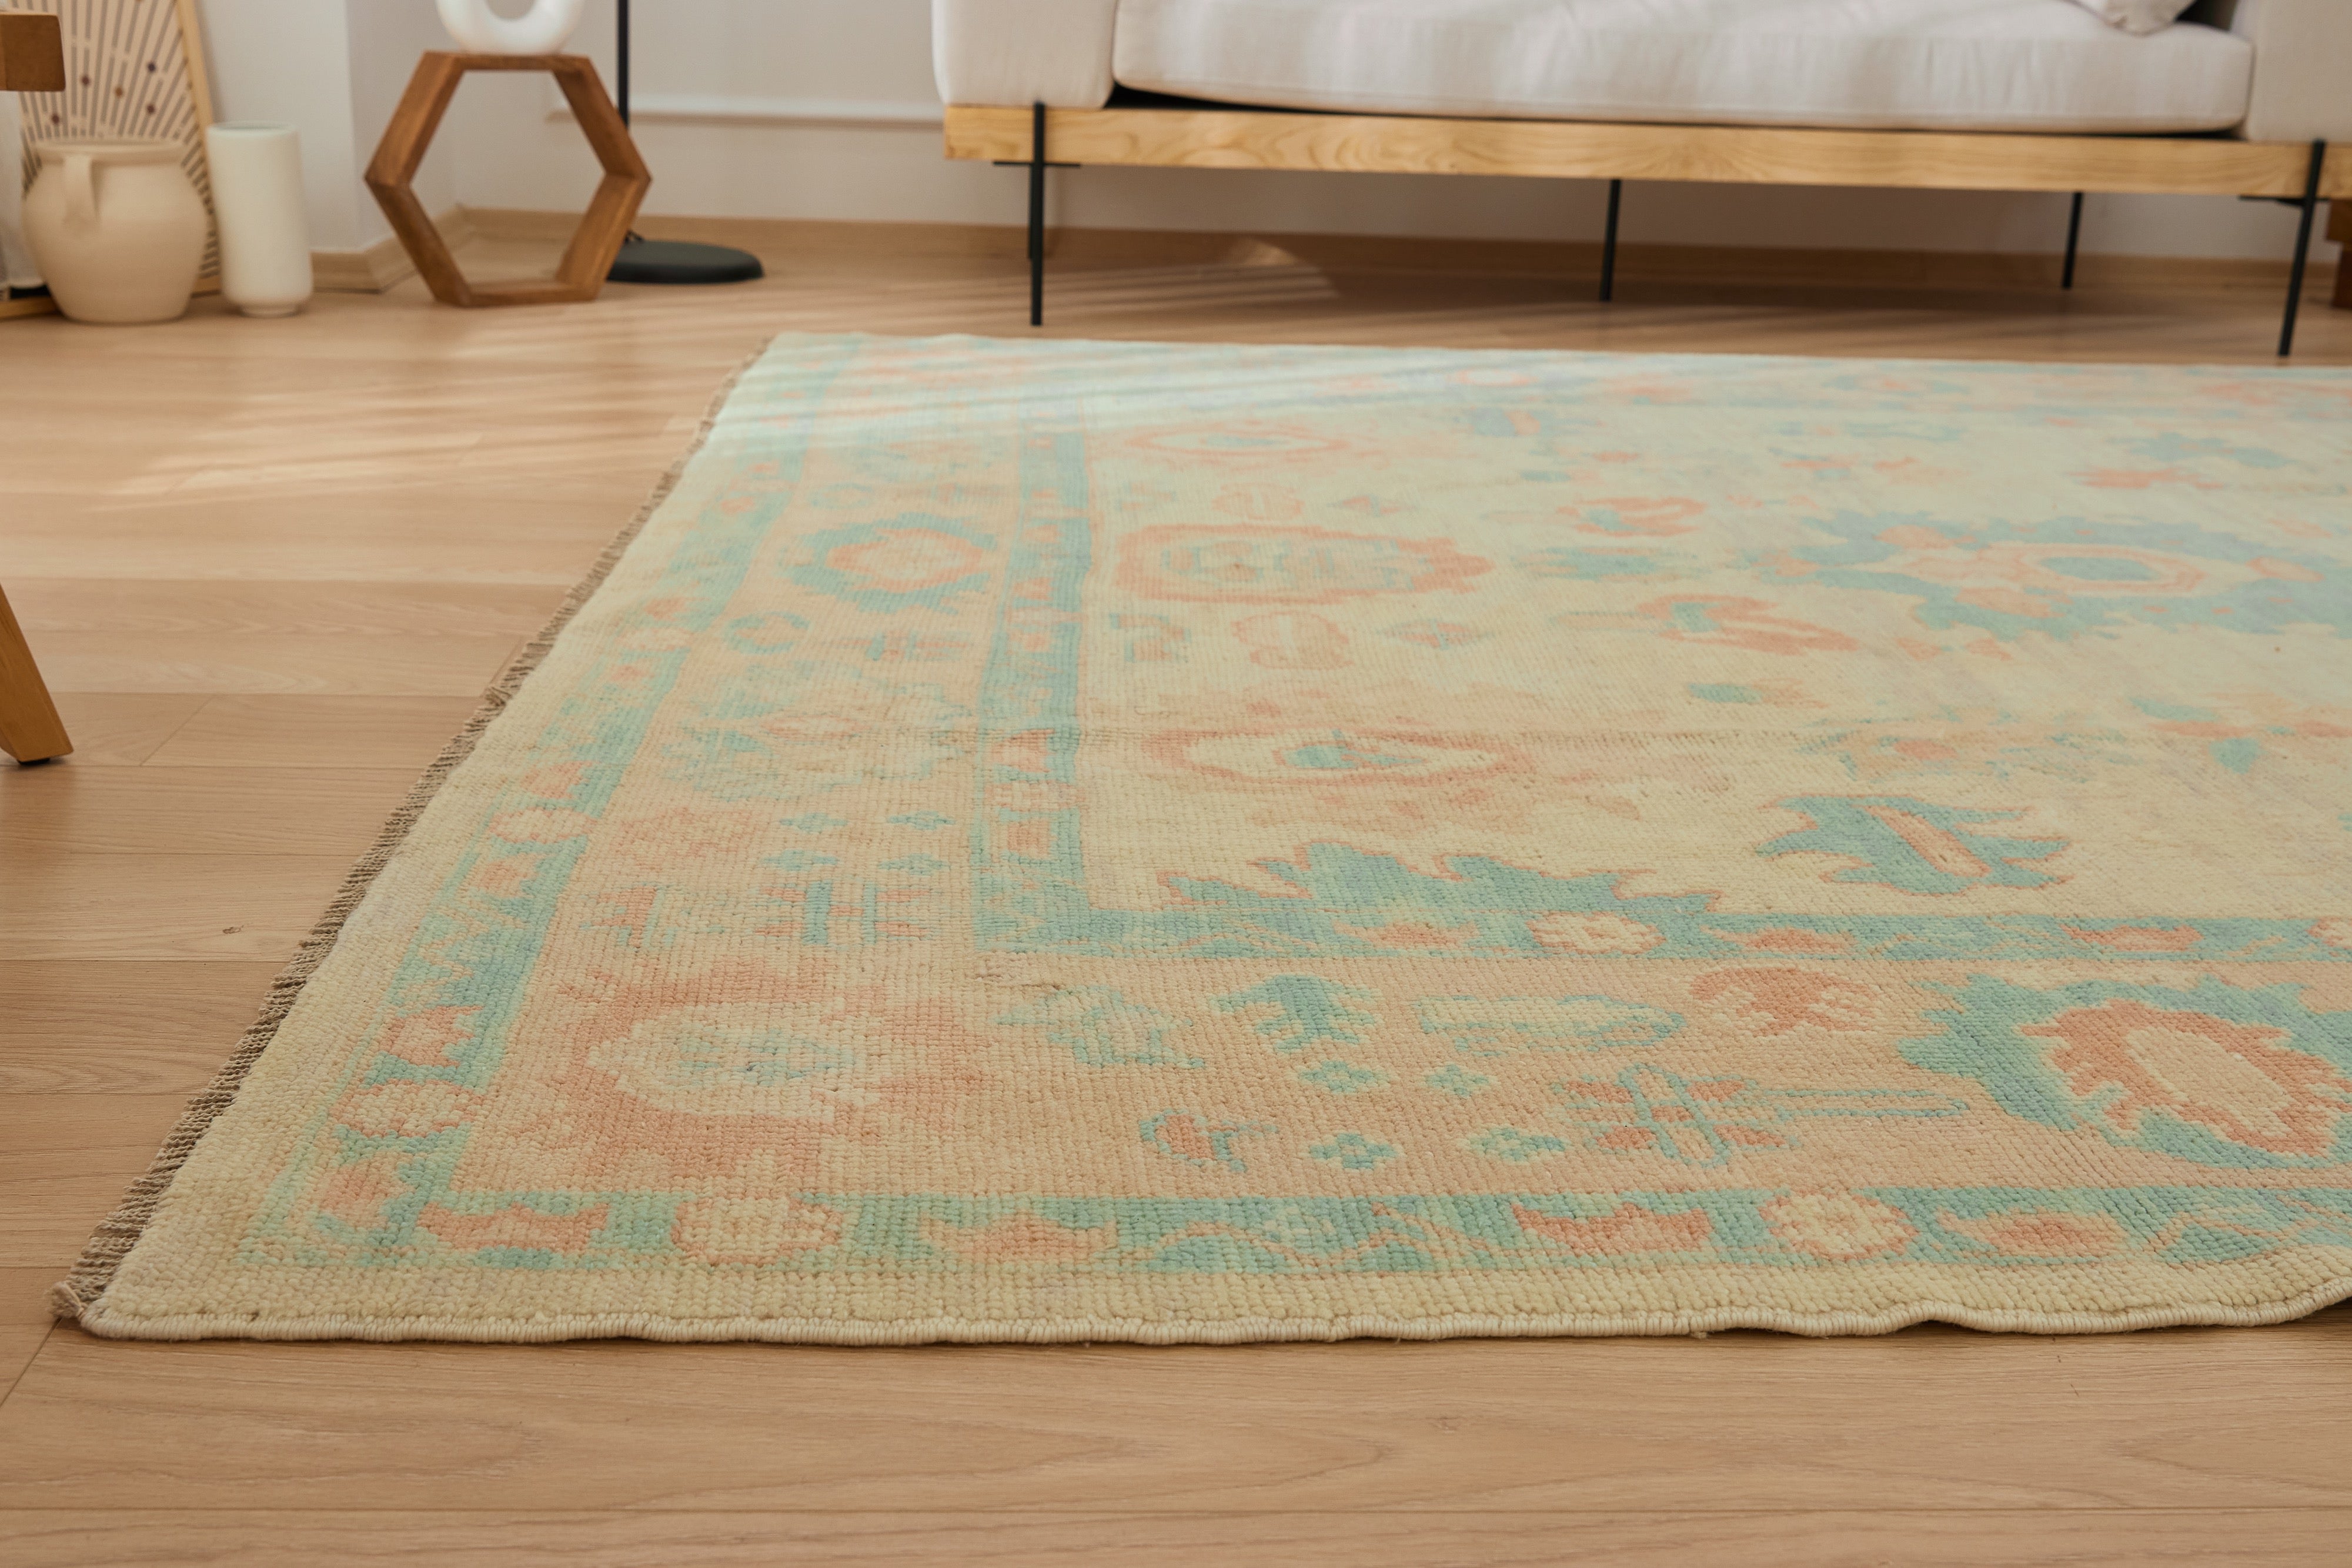 Nayla's Elegance | Authentic Turkish Rug | Hand-Knotted Carpet | Kuden Rugs